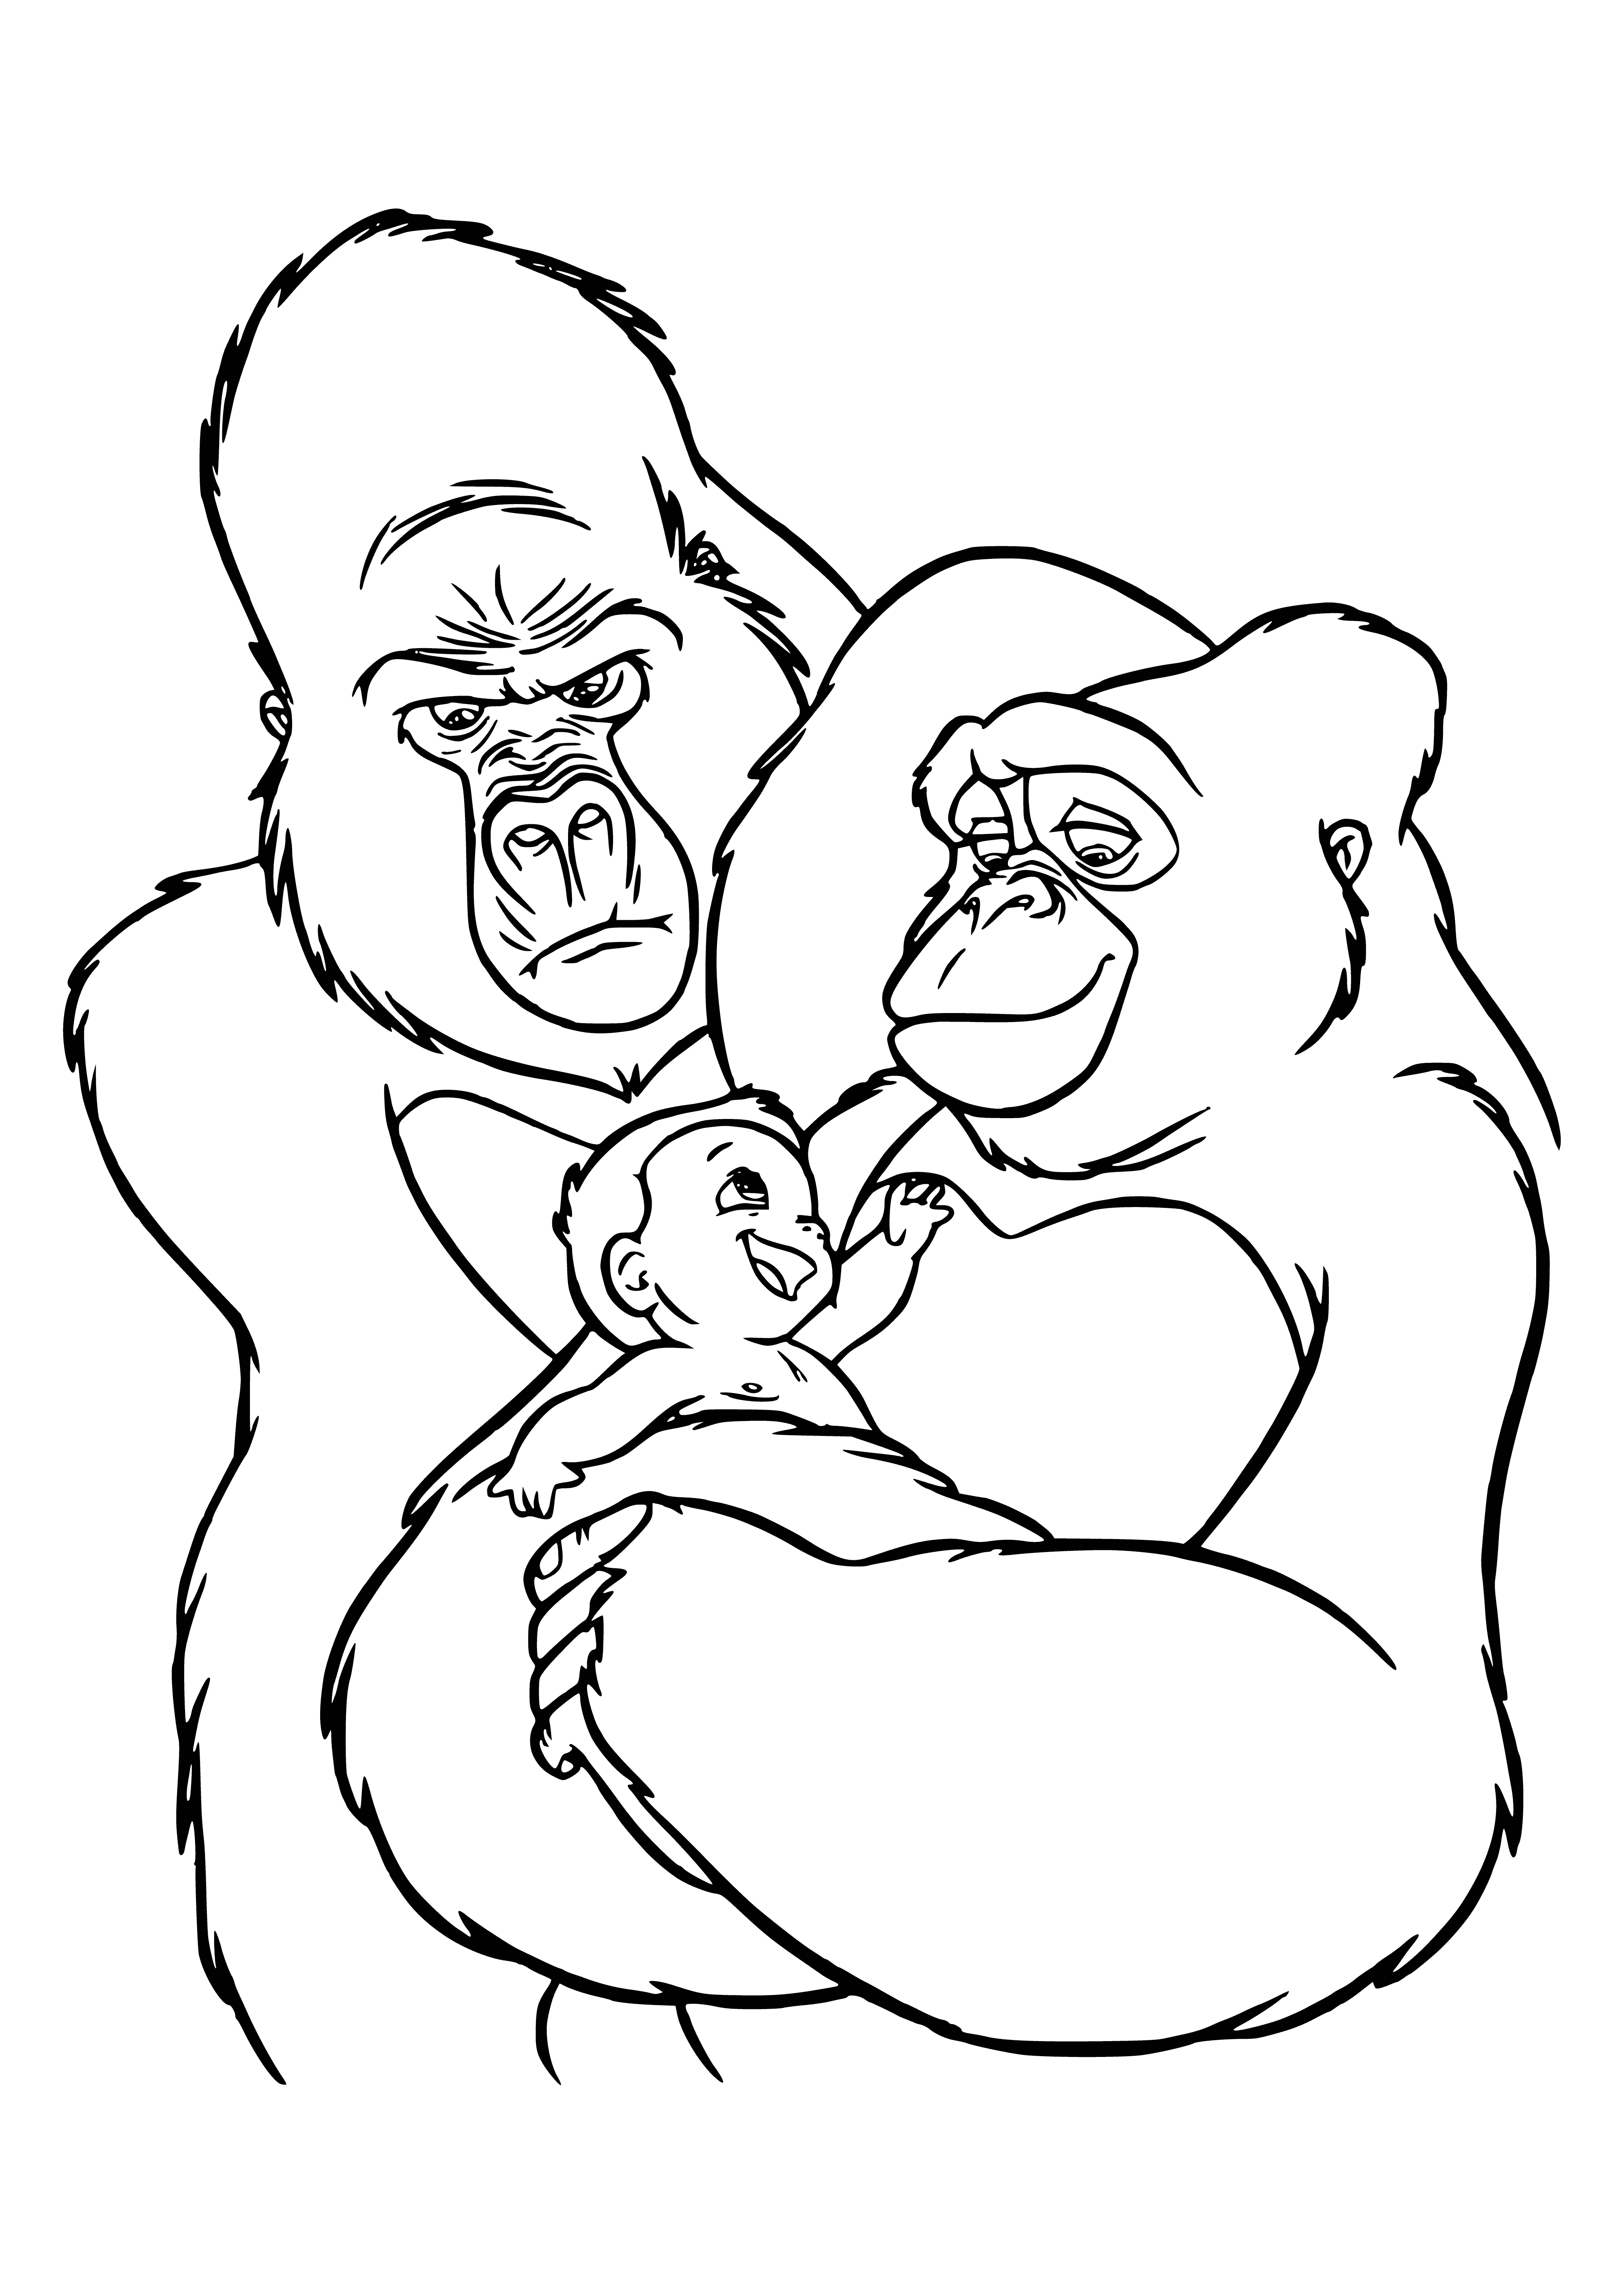 coloring page: A family of gorillas sits contentedly on a tree branch, the parents embracing while their child clings to the mother's fur.